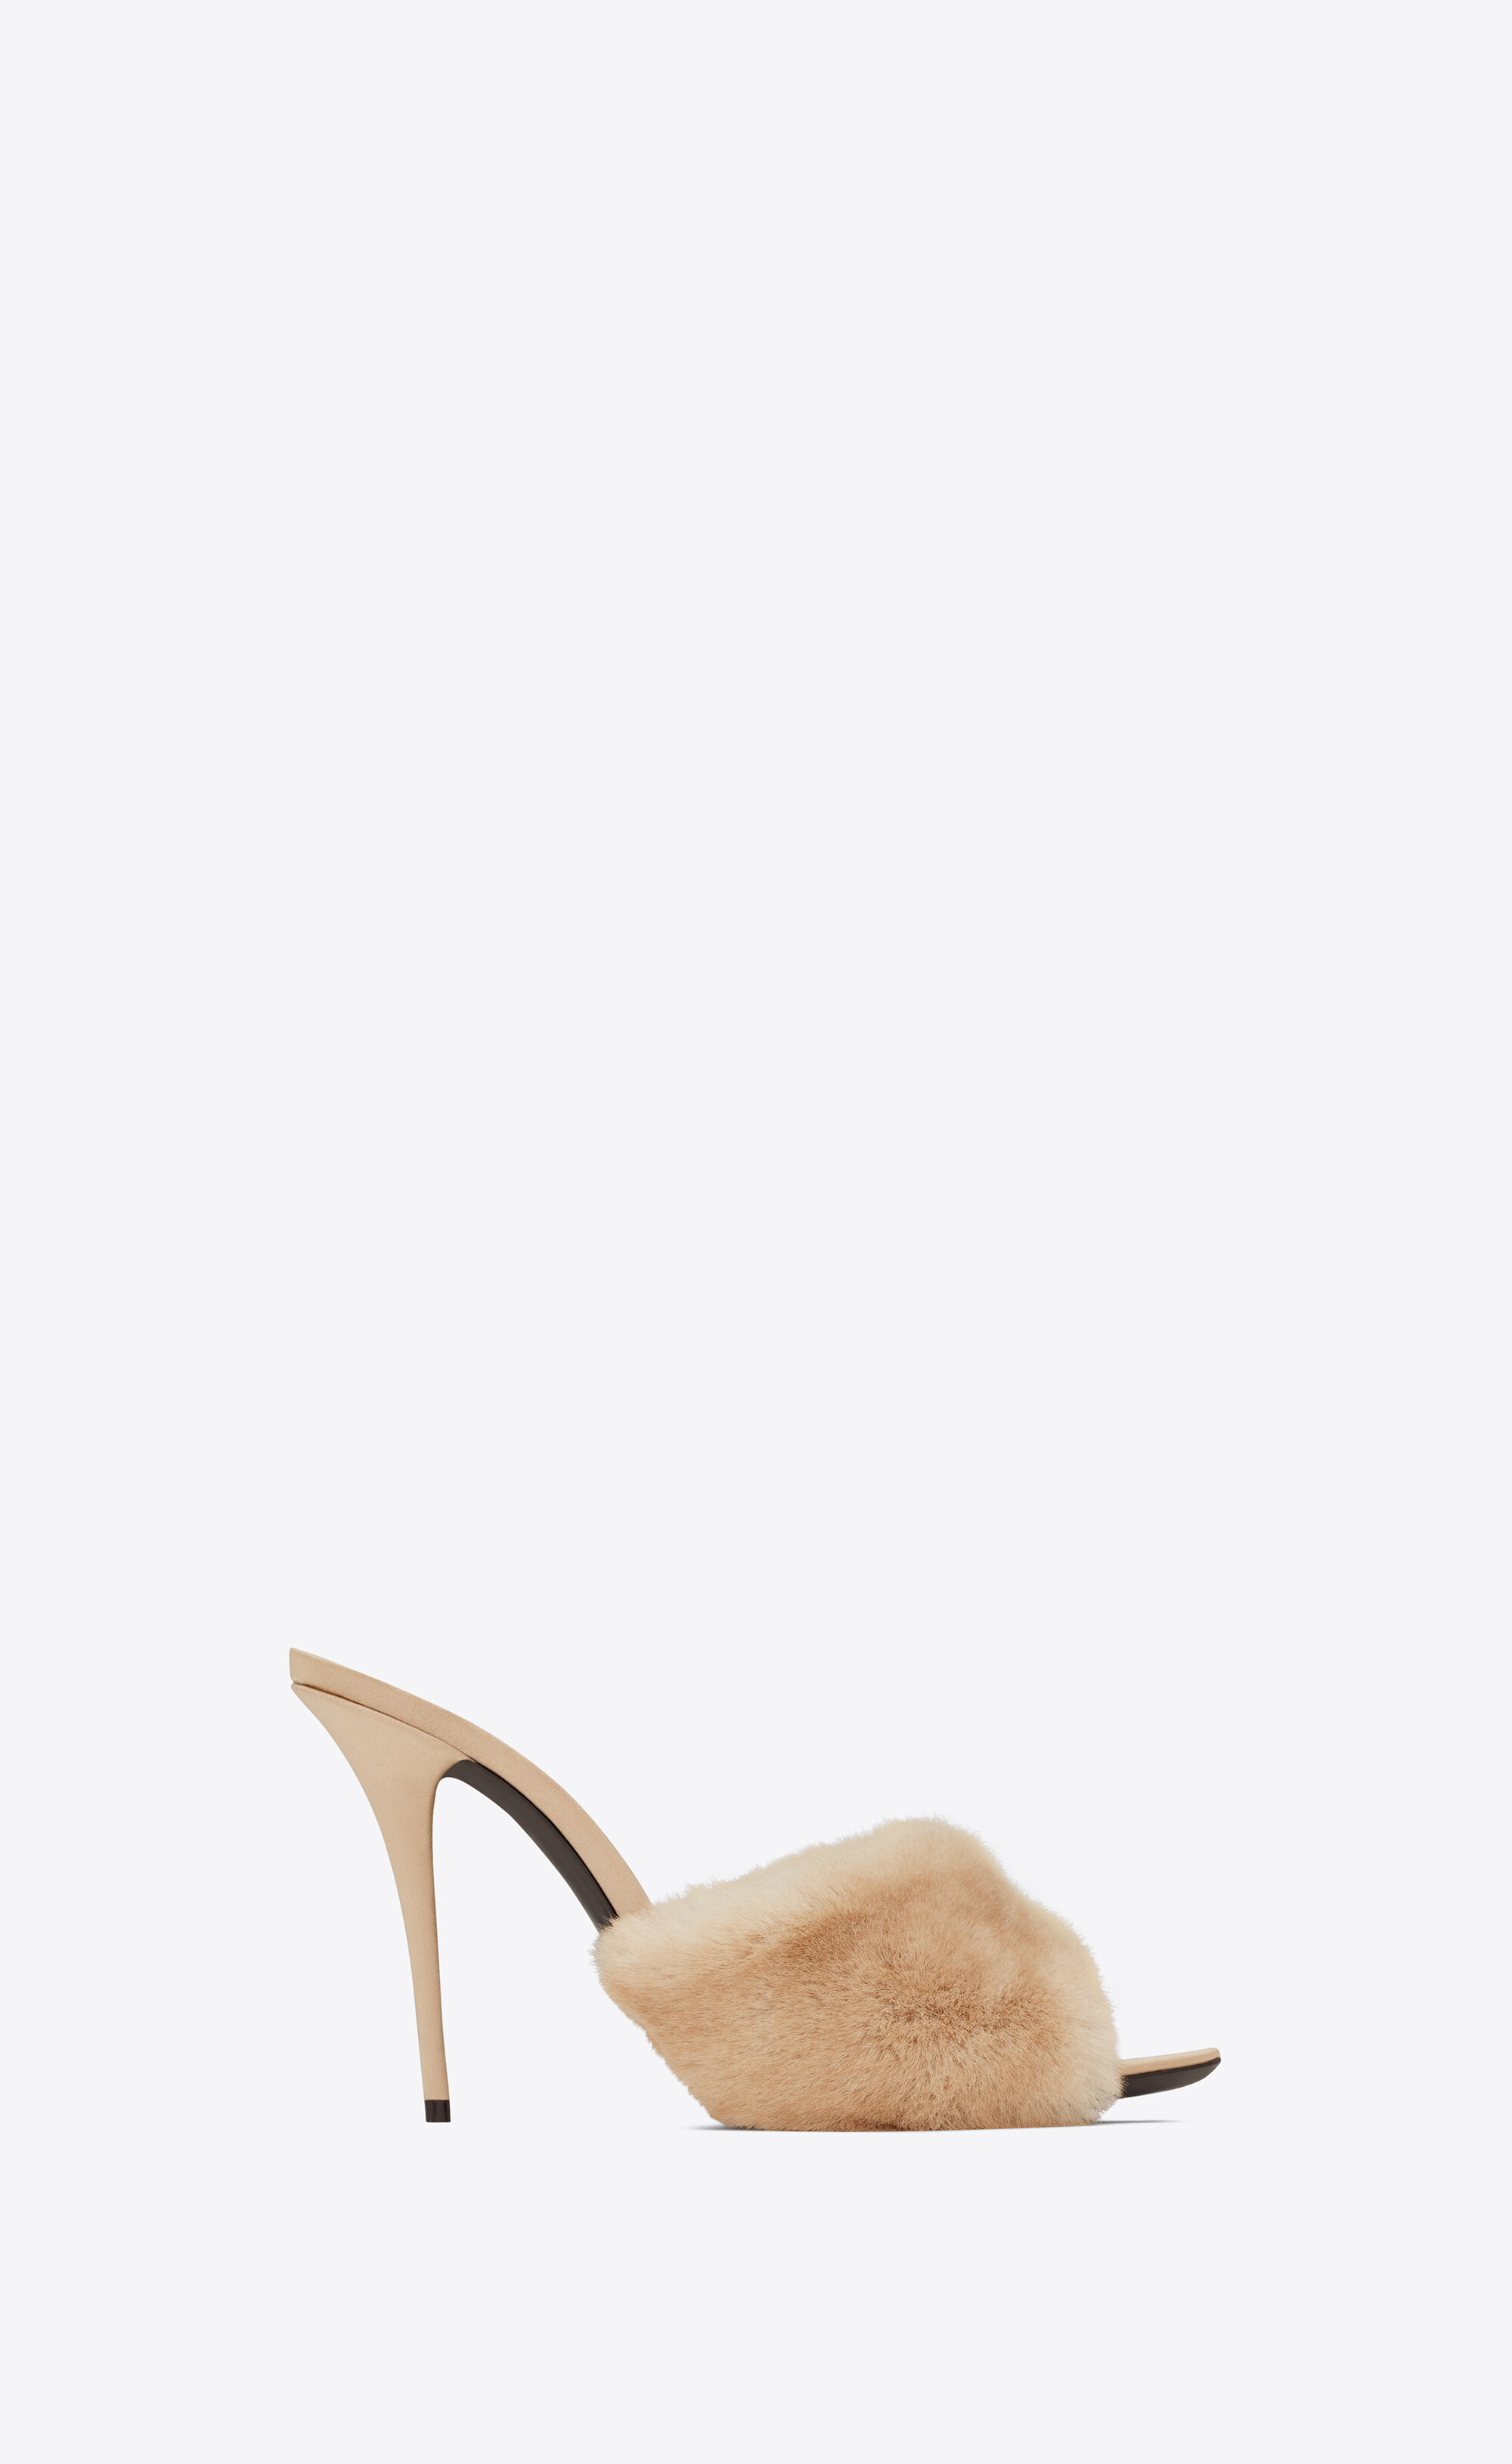 LA 16 HEELED MULES IN ANIMAL FREE-FUR AND SMOOTH LEATHER, Saint Laurent